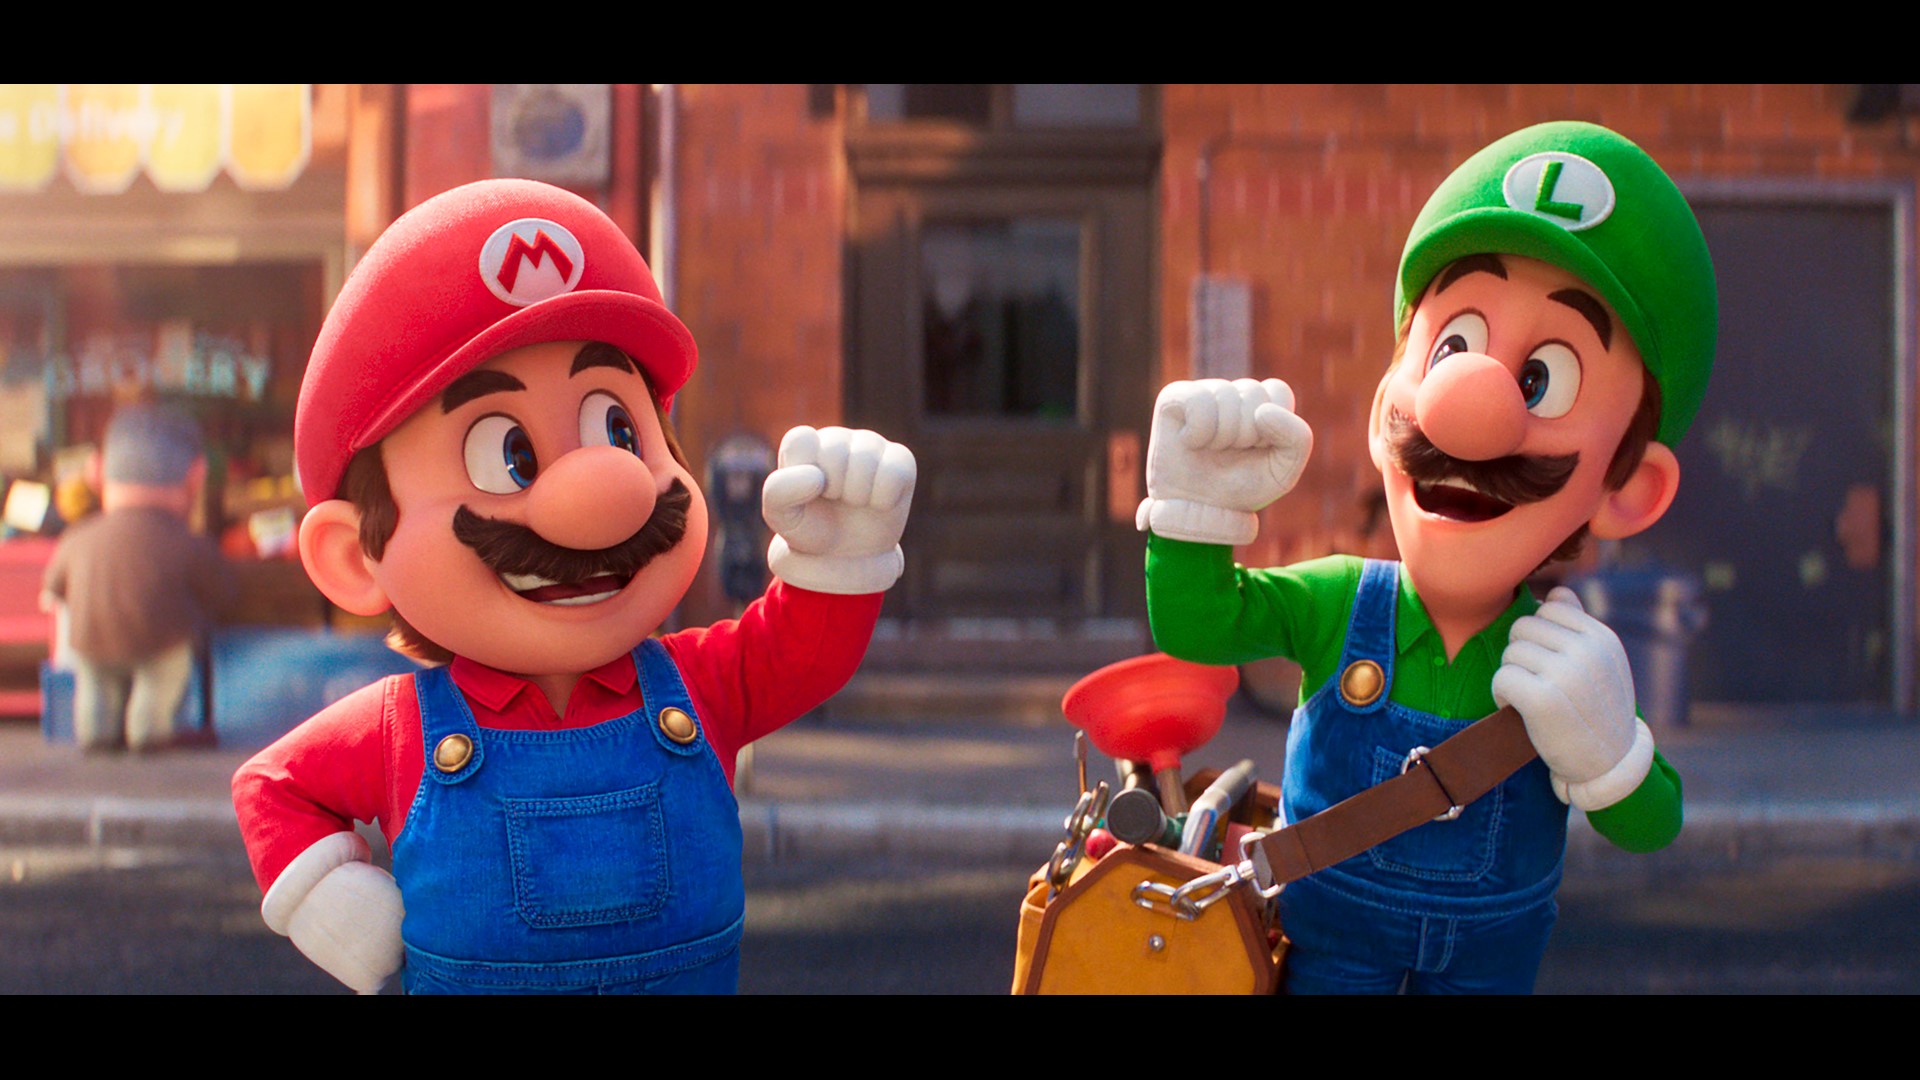 The popular Nintendo mascot leaps onto the big screen for only the second time with a new animated film.